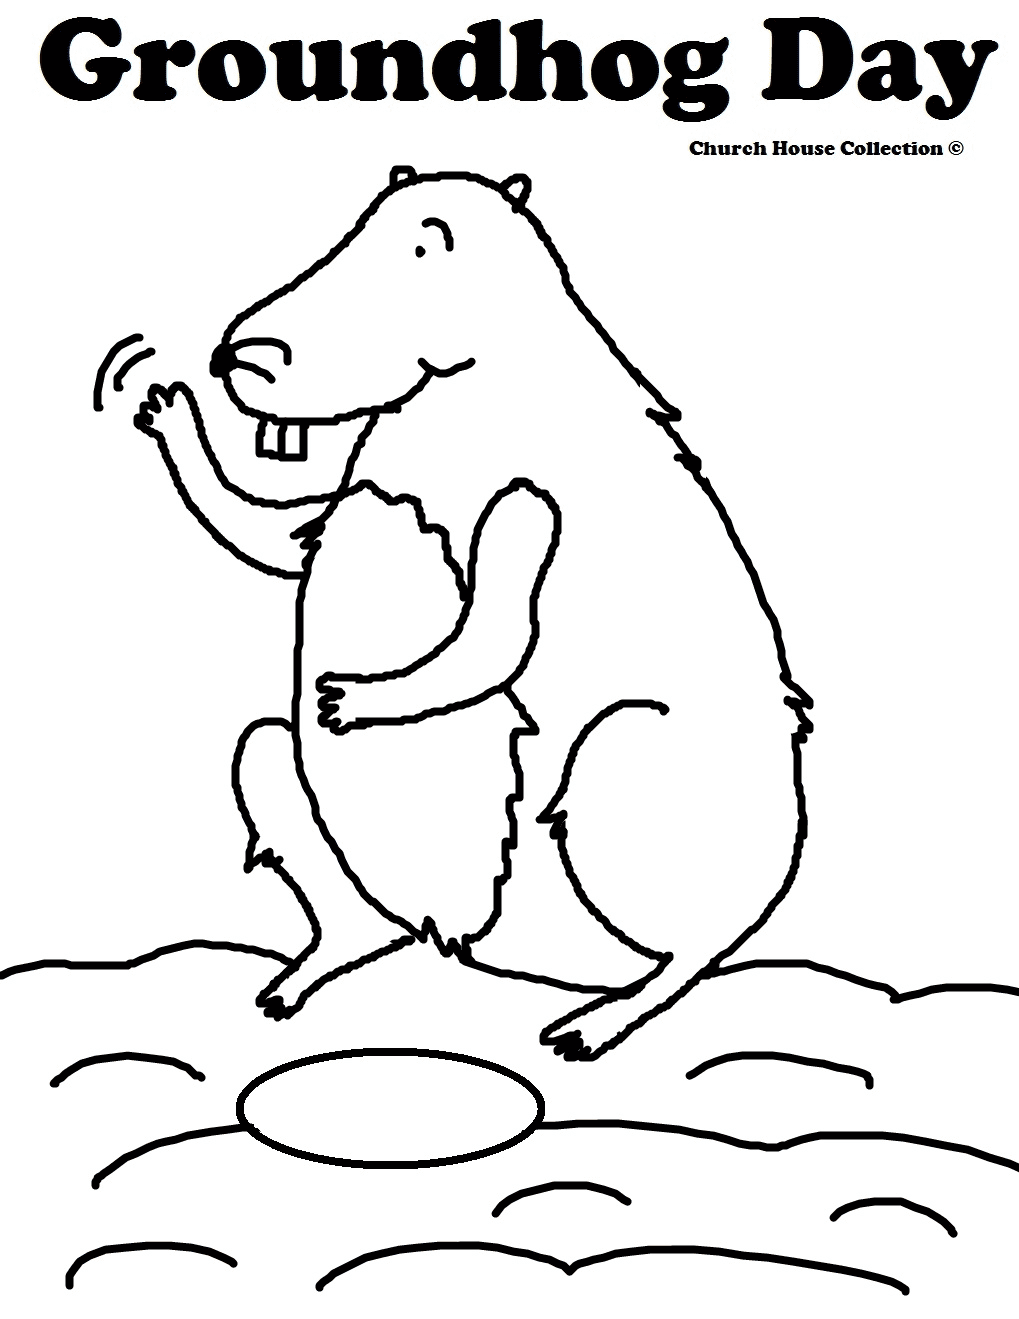 Free Groundhog Day for Kids Coloring Page